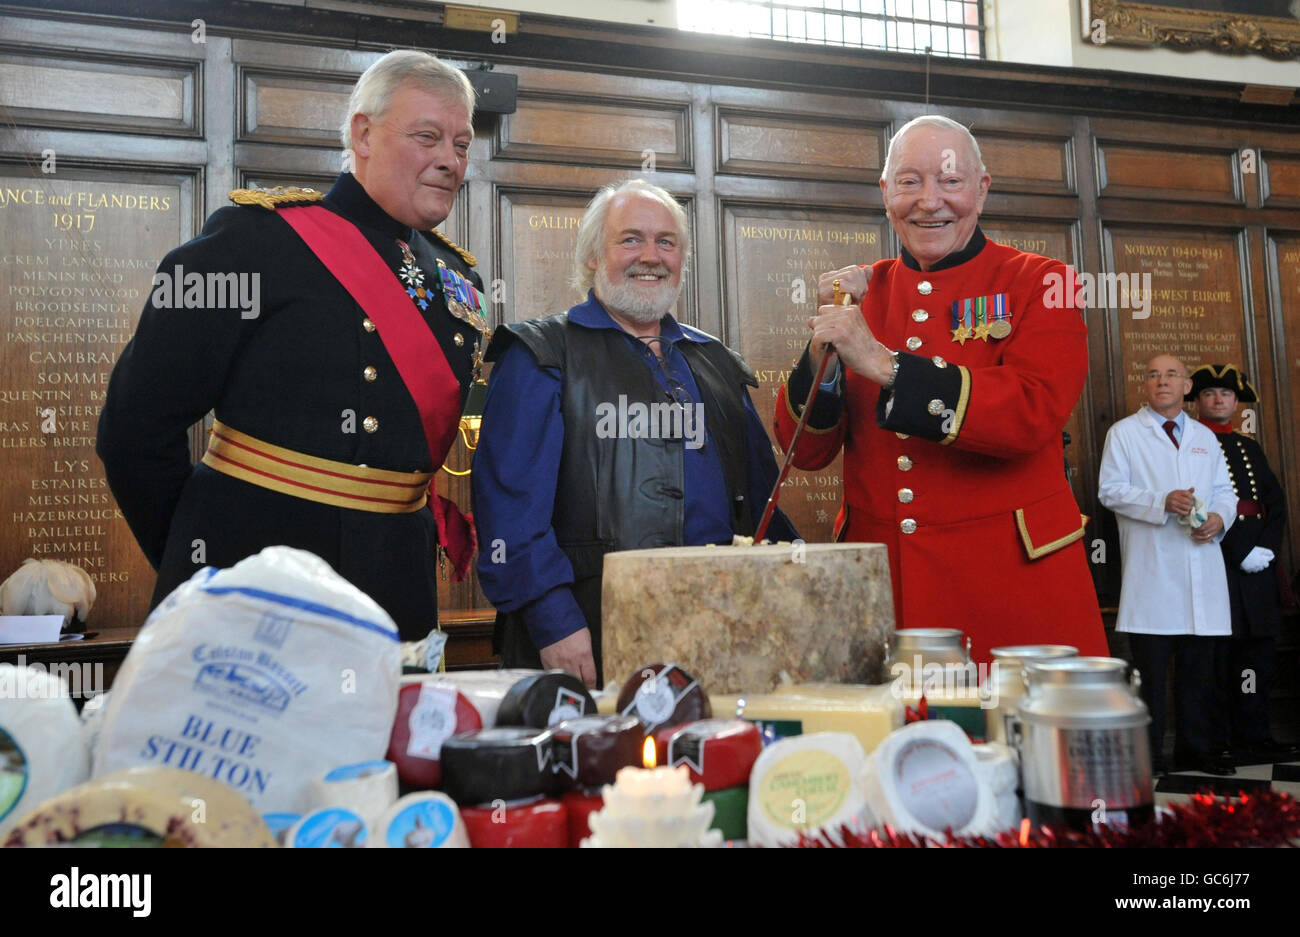 Chelsea pensioner Bill Moylon, aged 94, (right) a former prisoner of war who helped build the bridge on the River Kwai, cuts the cheese at a special Christmas ceremony at the Royal Hospital Chelsea, watched by RHC Governor, Gen Lord Walker, left, and Sandy Wilkie, Chairman of the Dairy Council. Stock Photo